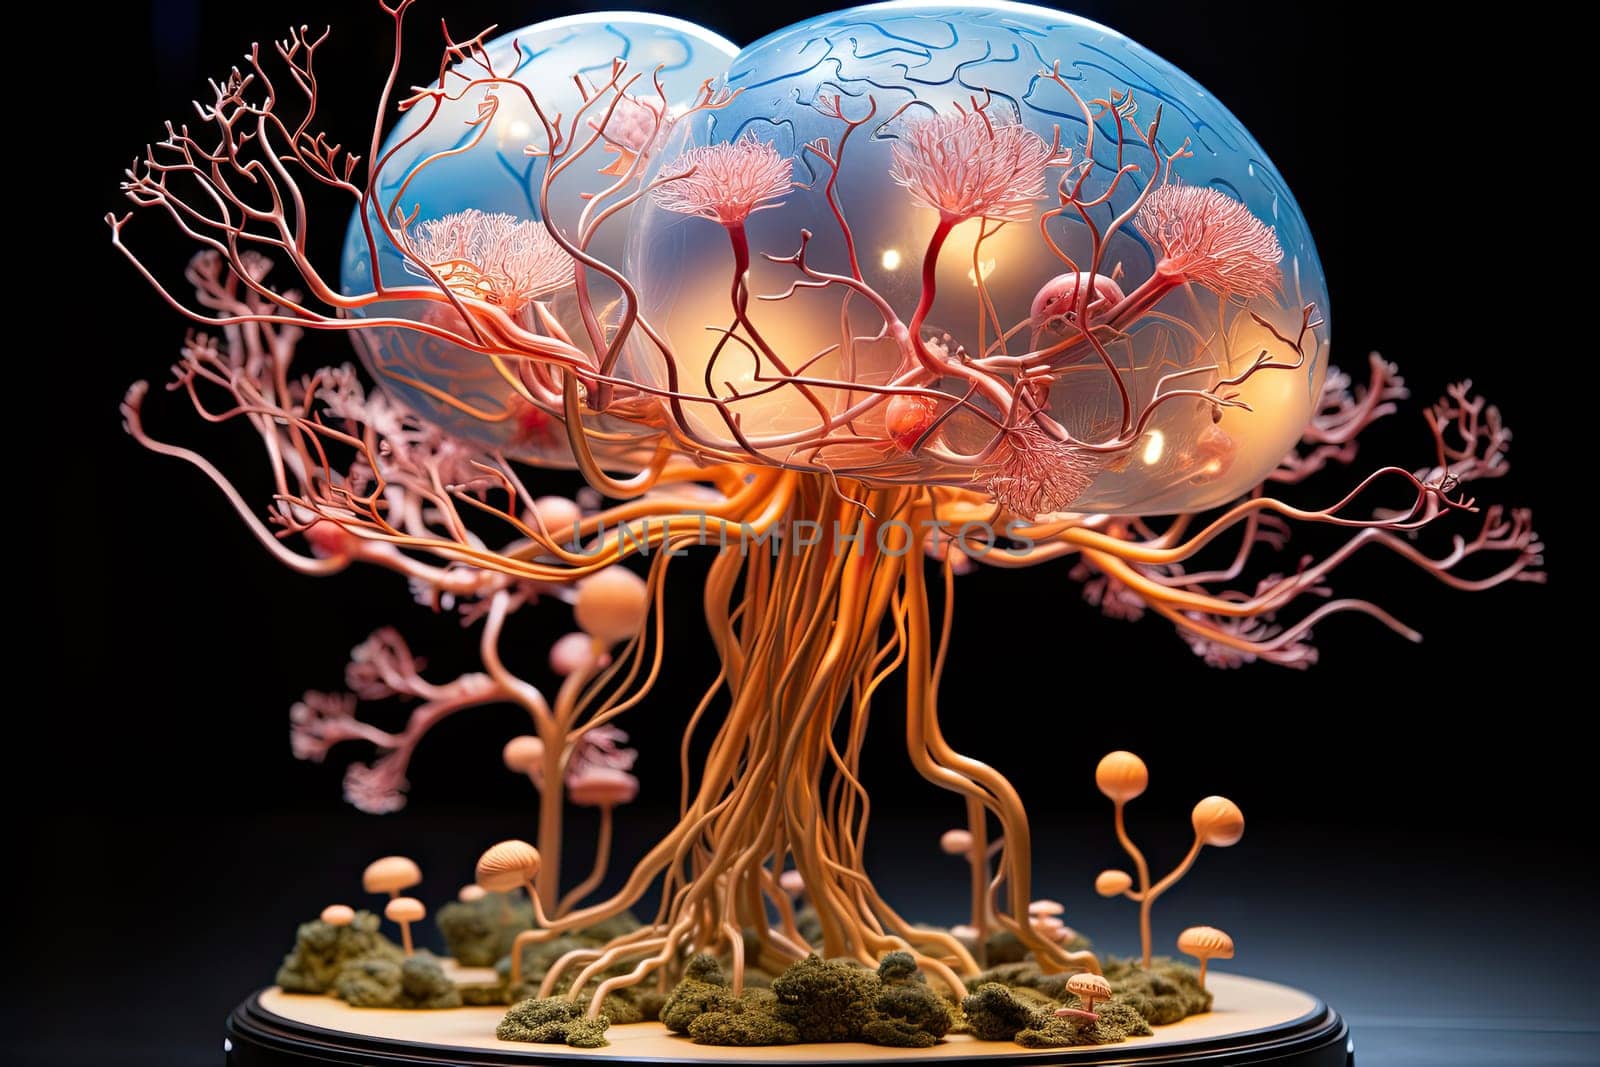 The Enchanting Dance of the Jellyfish: A Sculpture Adorned with Vibrant Corals and Delicate Sea Life